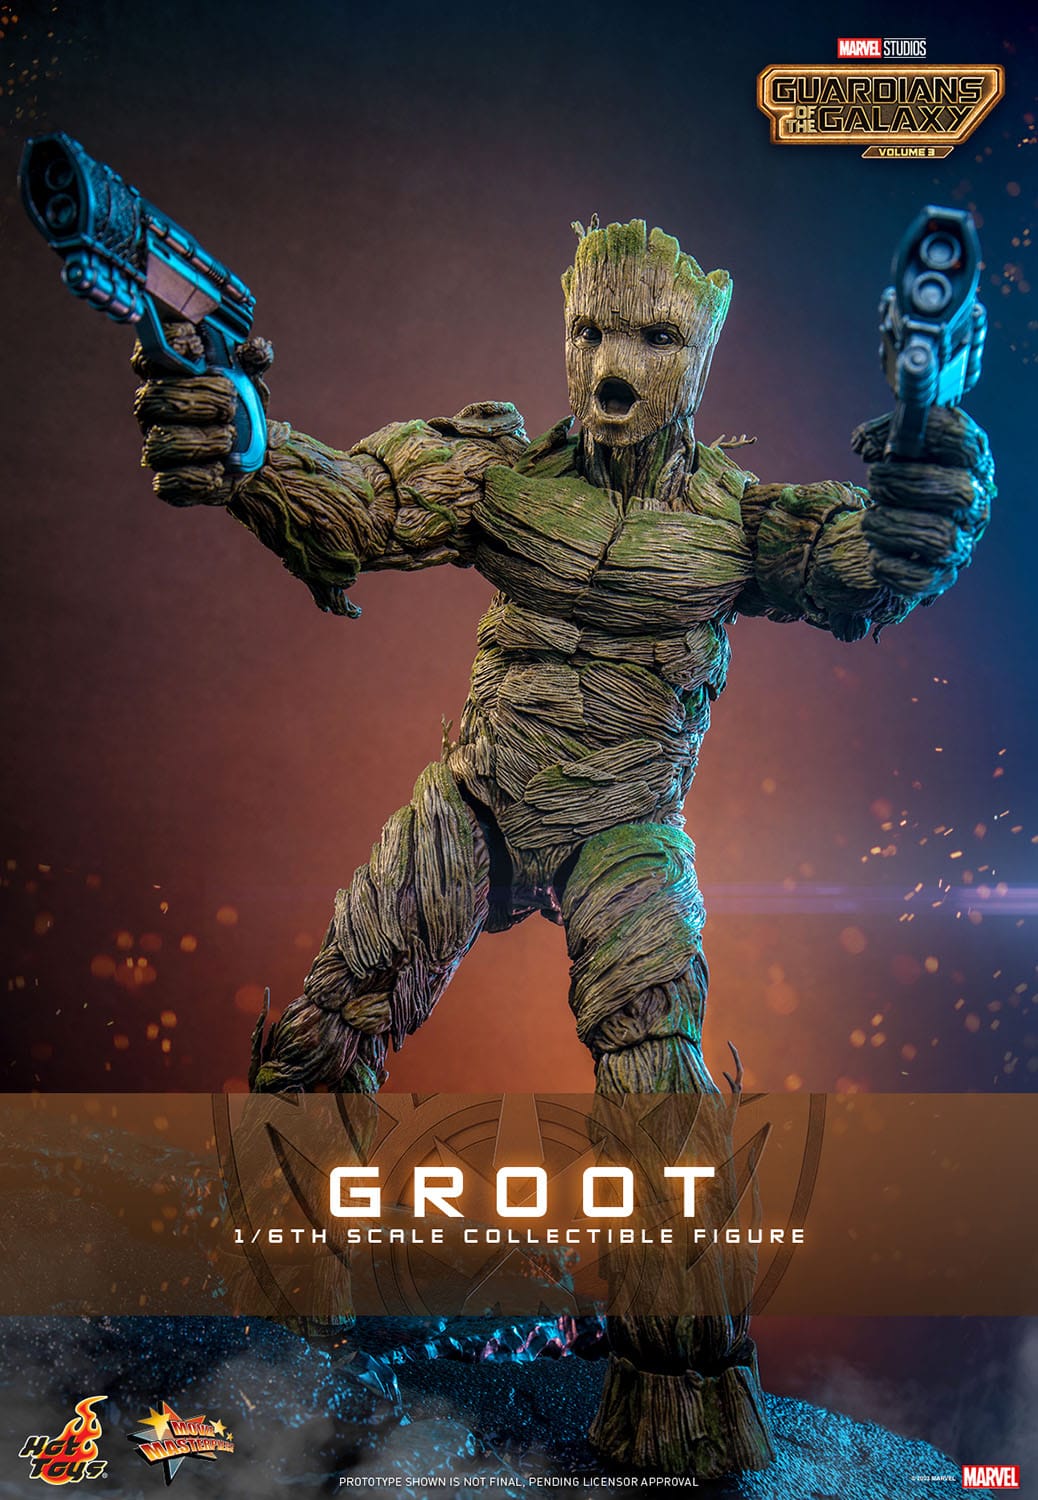 Hot Toys Guardians Of The Galaxy Vol. 3 Groot 1/6th Scale Figure